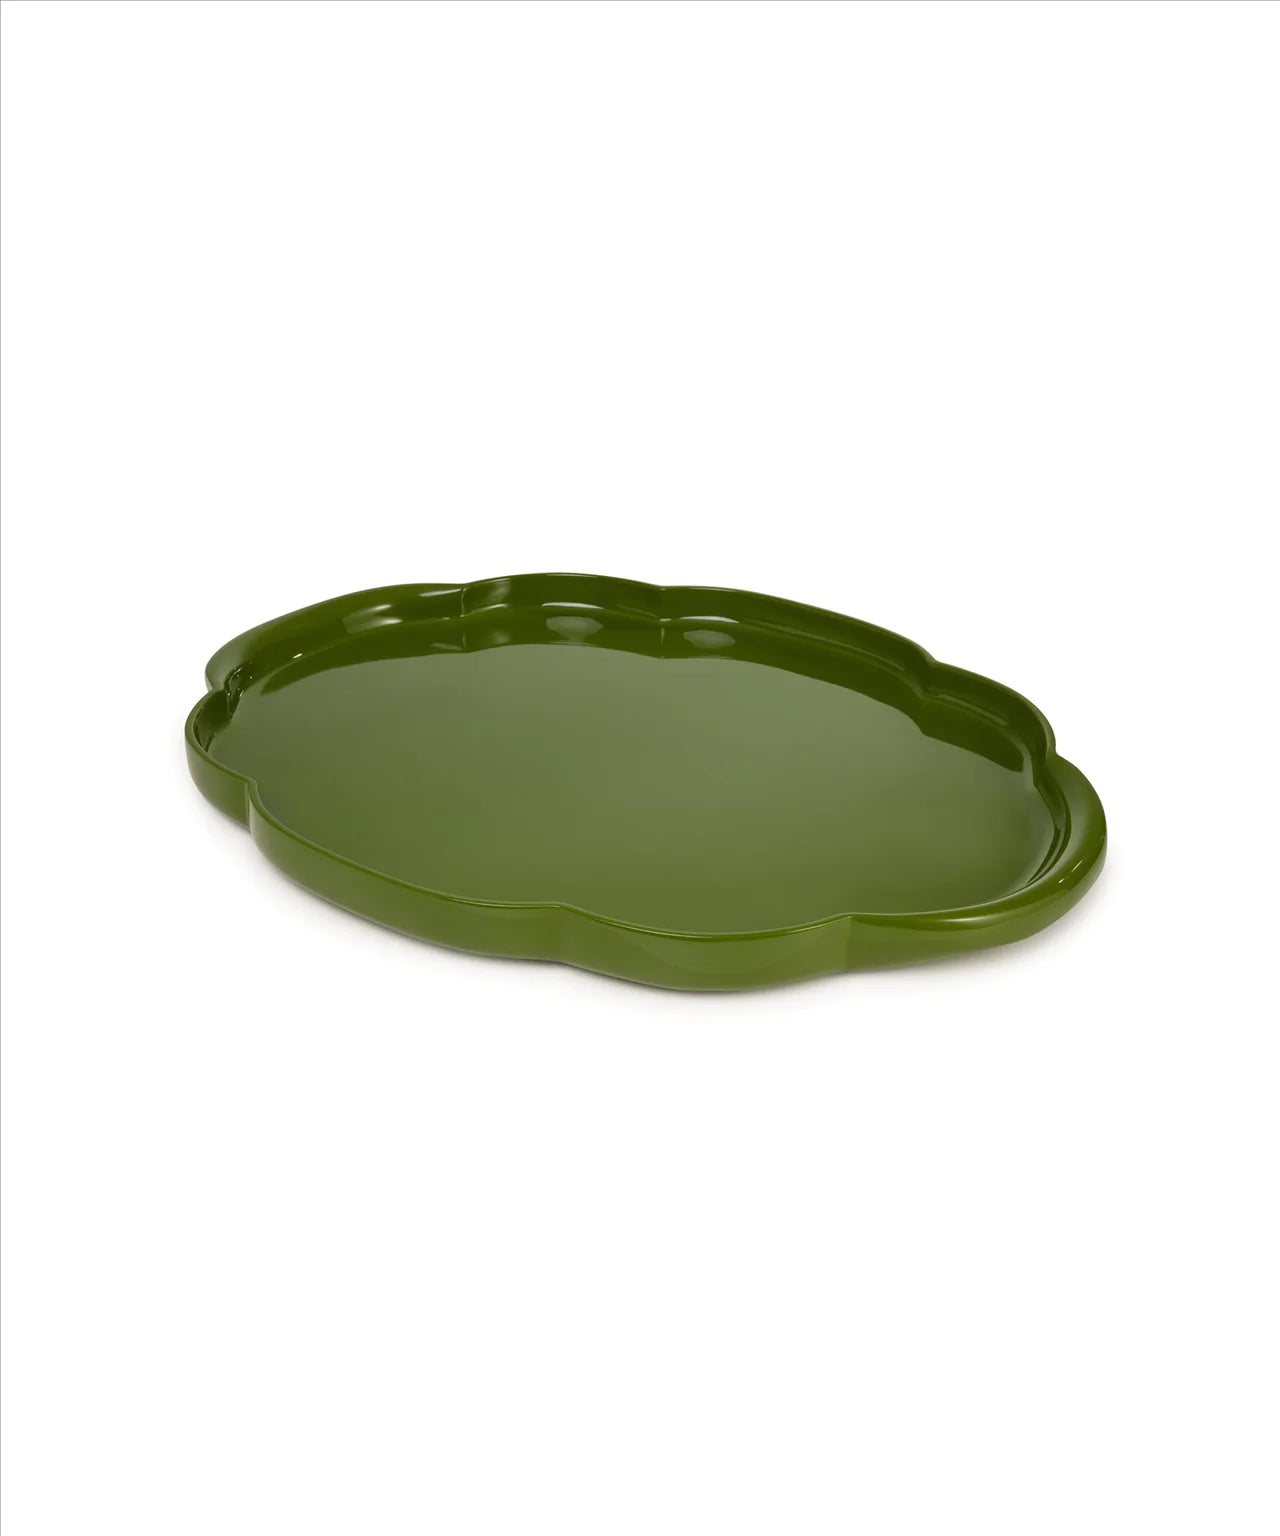 The Lacquer Company Oval Tray in Green